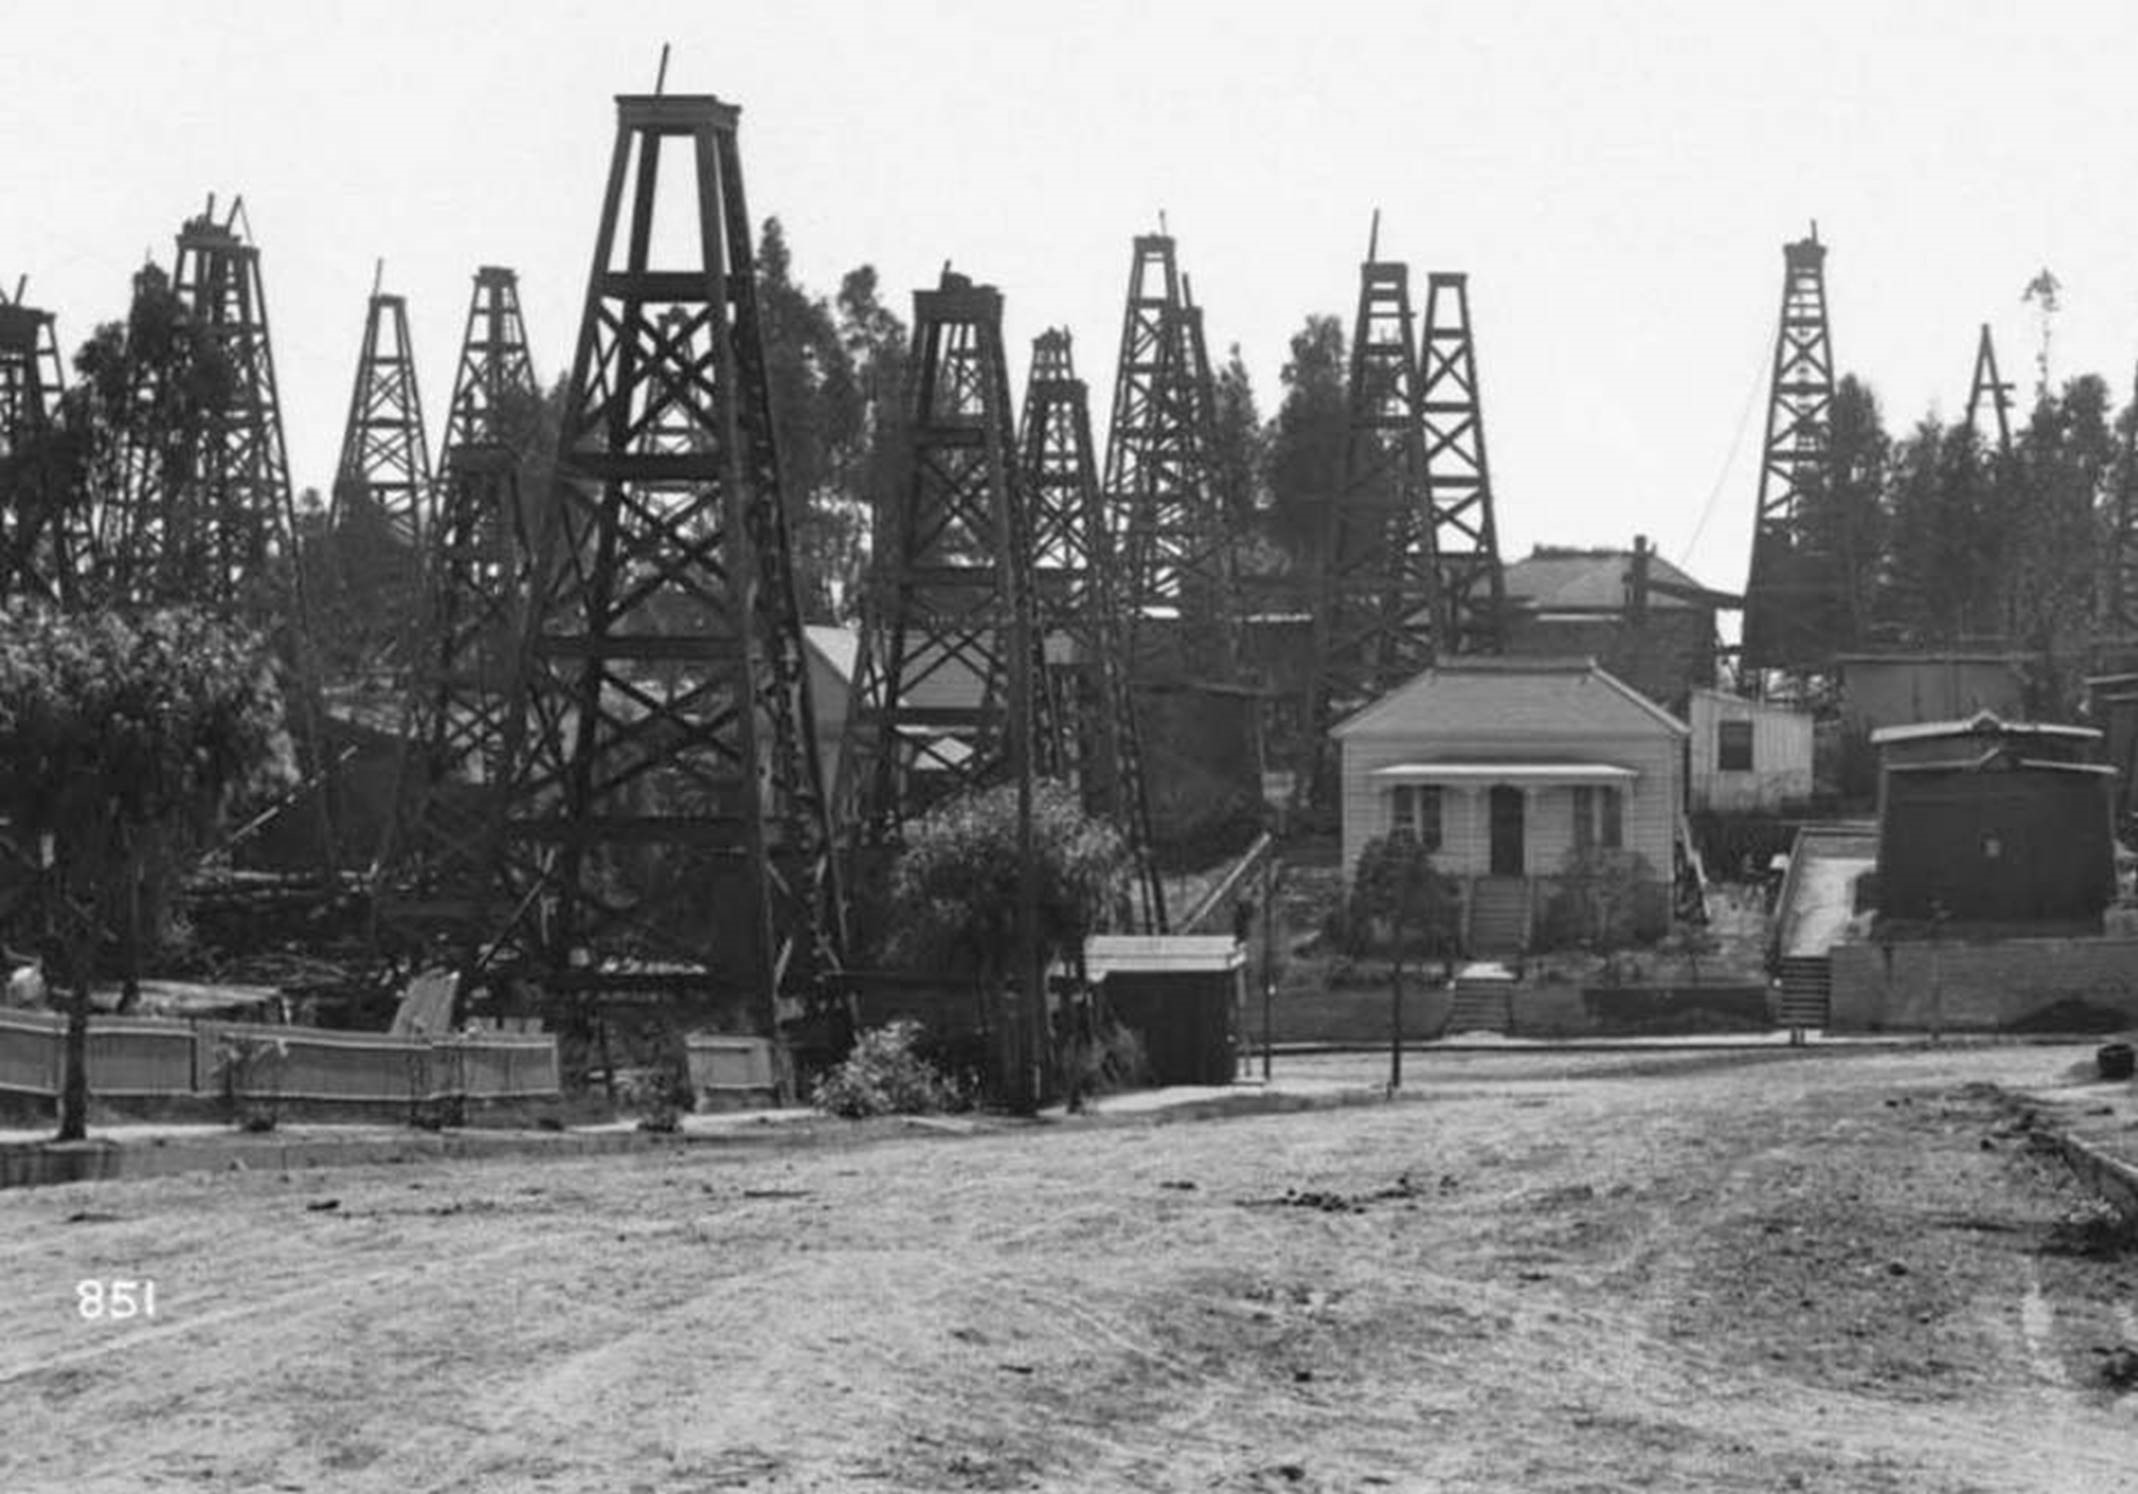 Los Angeles was an oil town